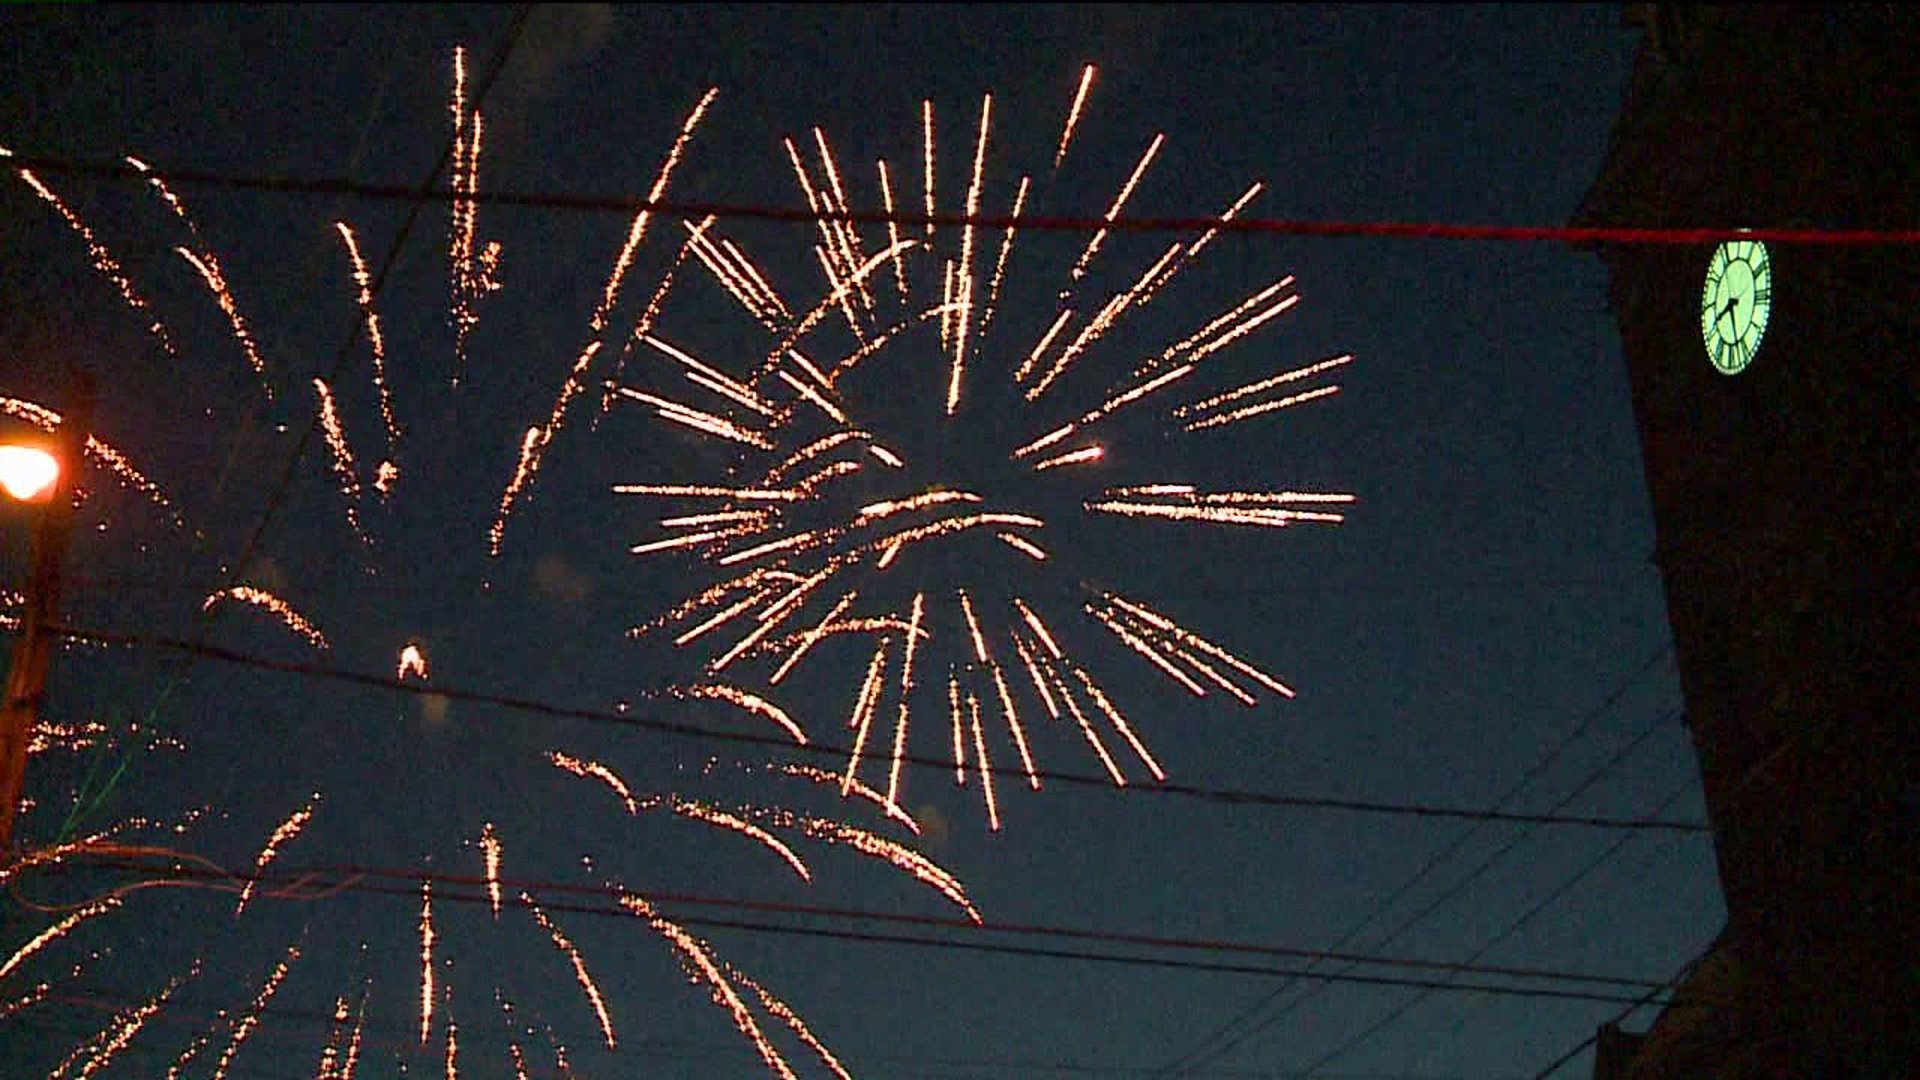 Fireworks Light up the Sky in Carbondale